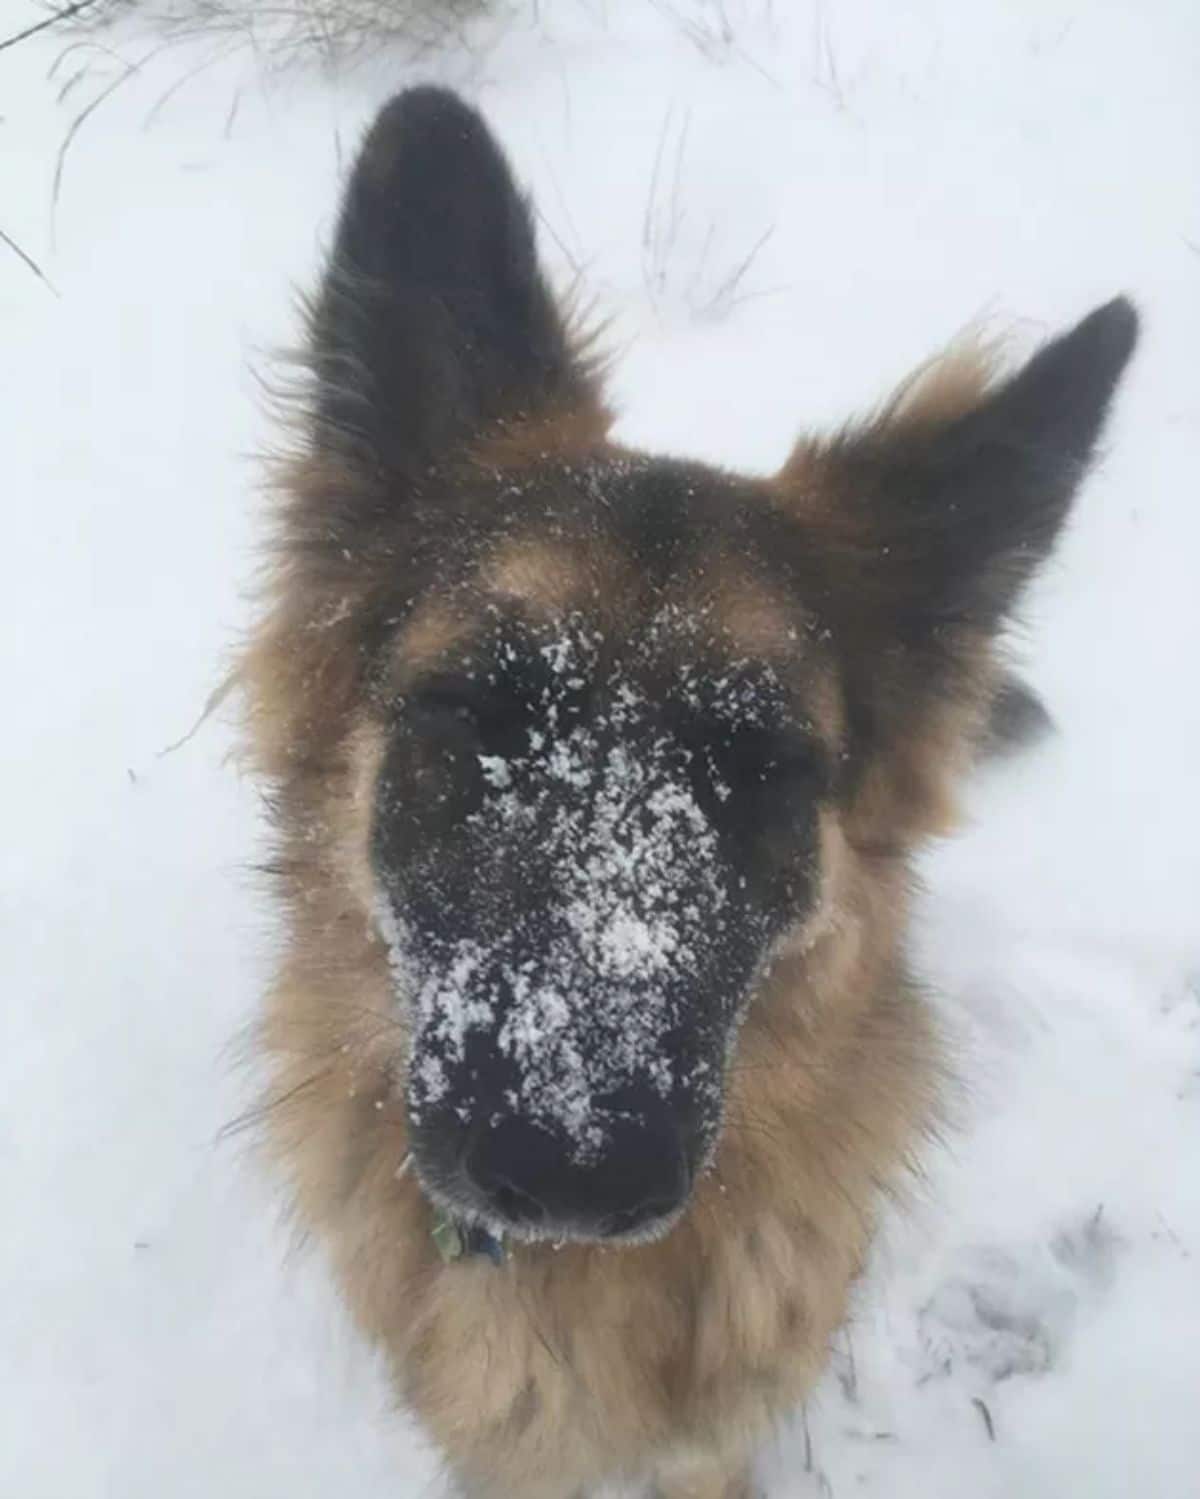 fluffy brown and black dog with snow on its face and standing in snow